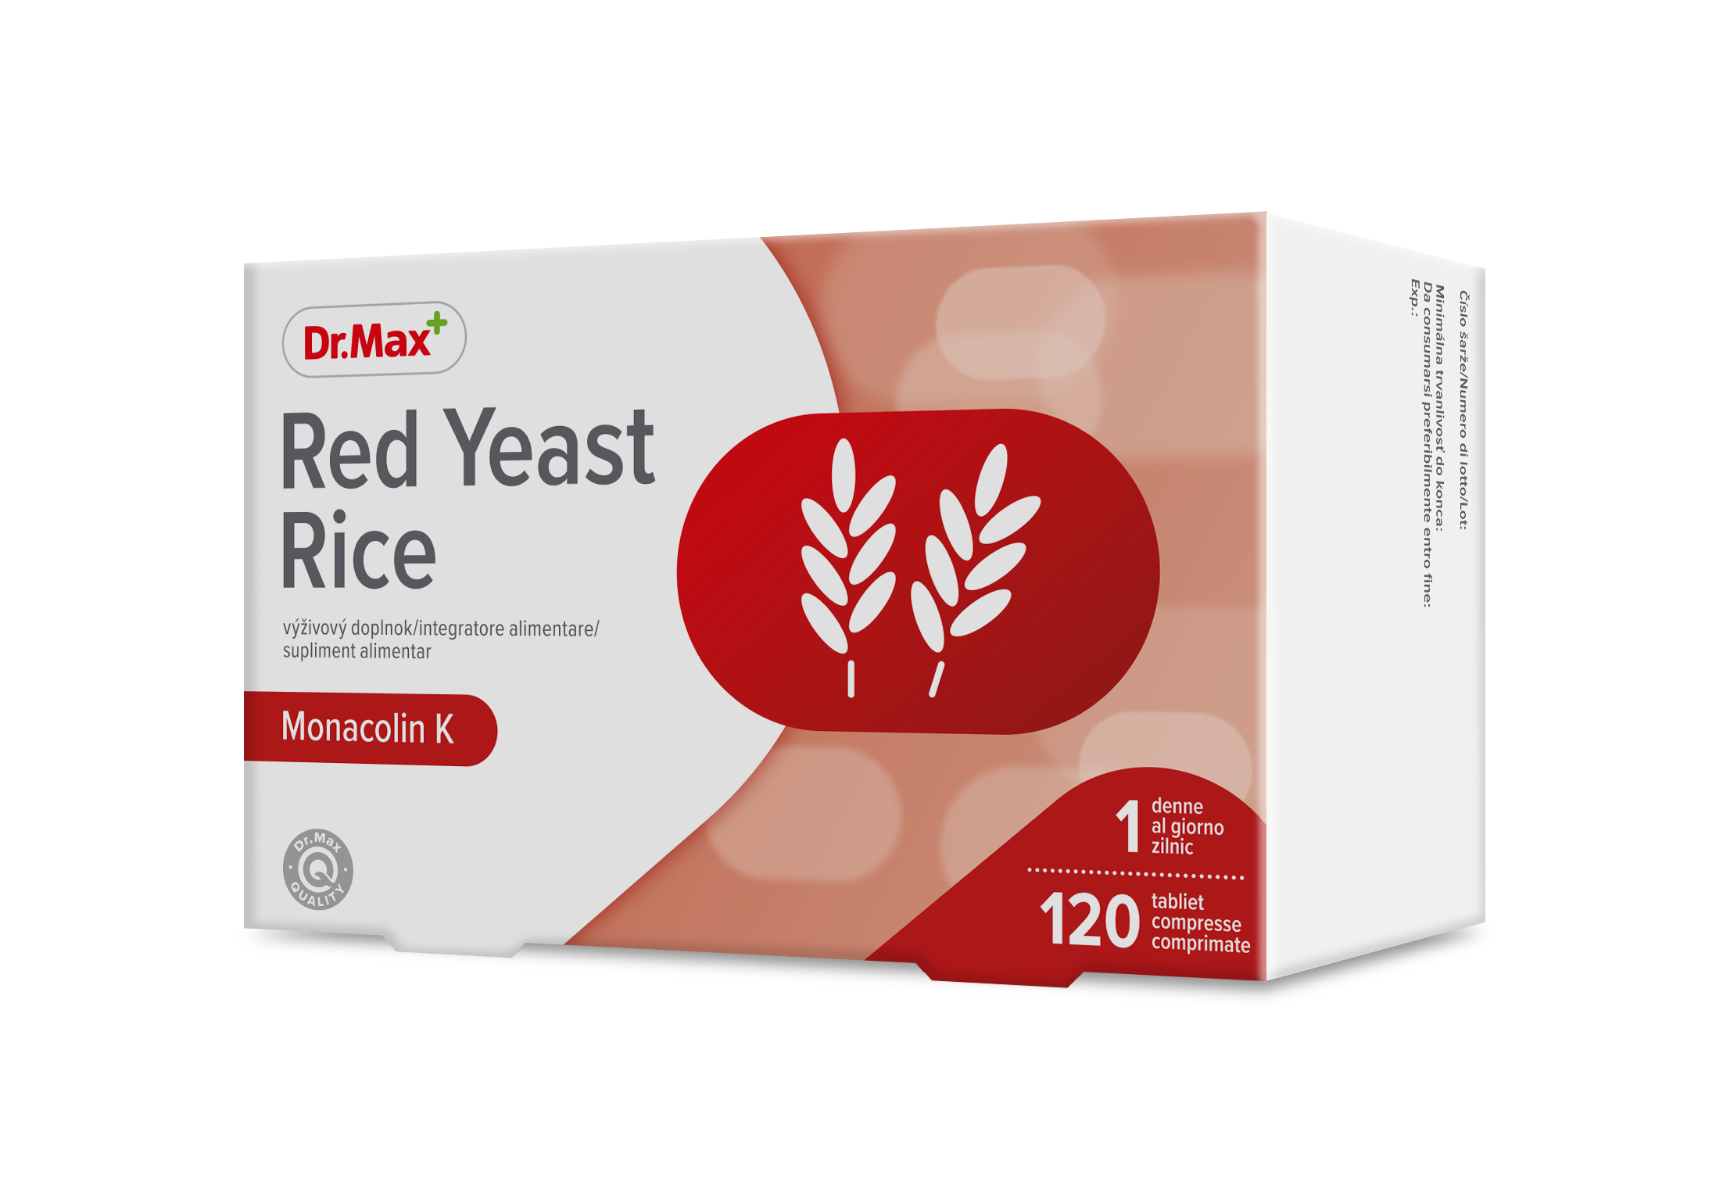 Dr.Max Red Yeast Rice, 120 comprimate filmate